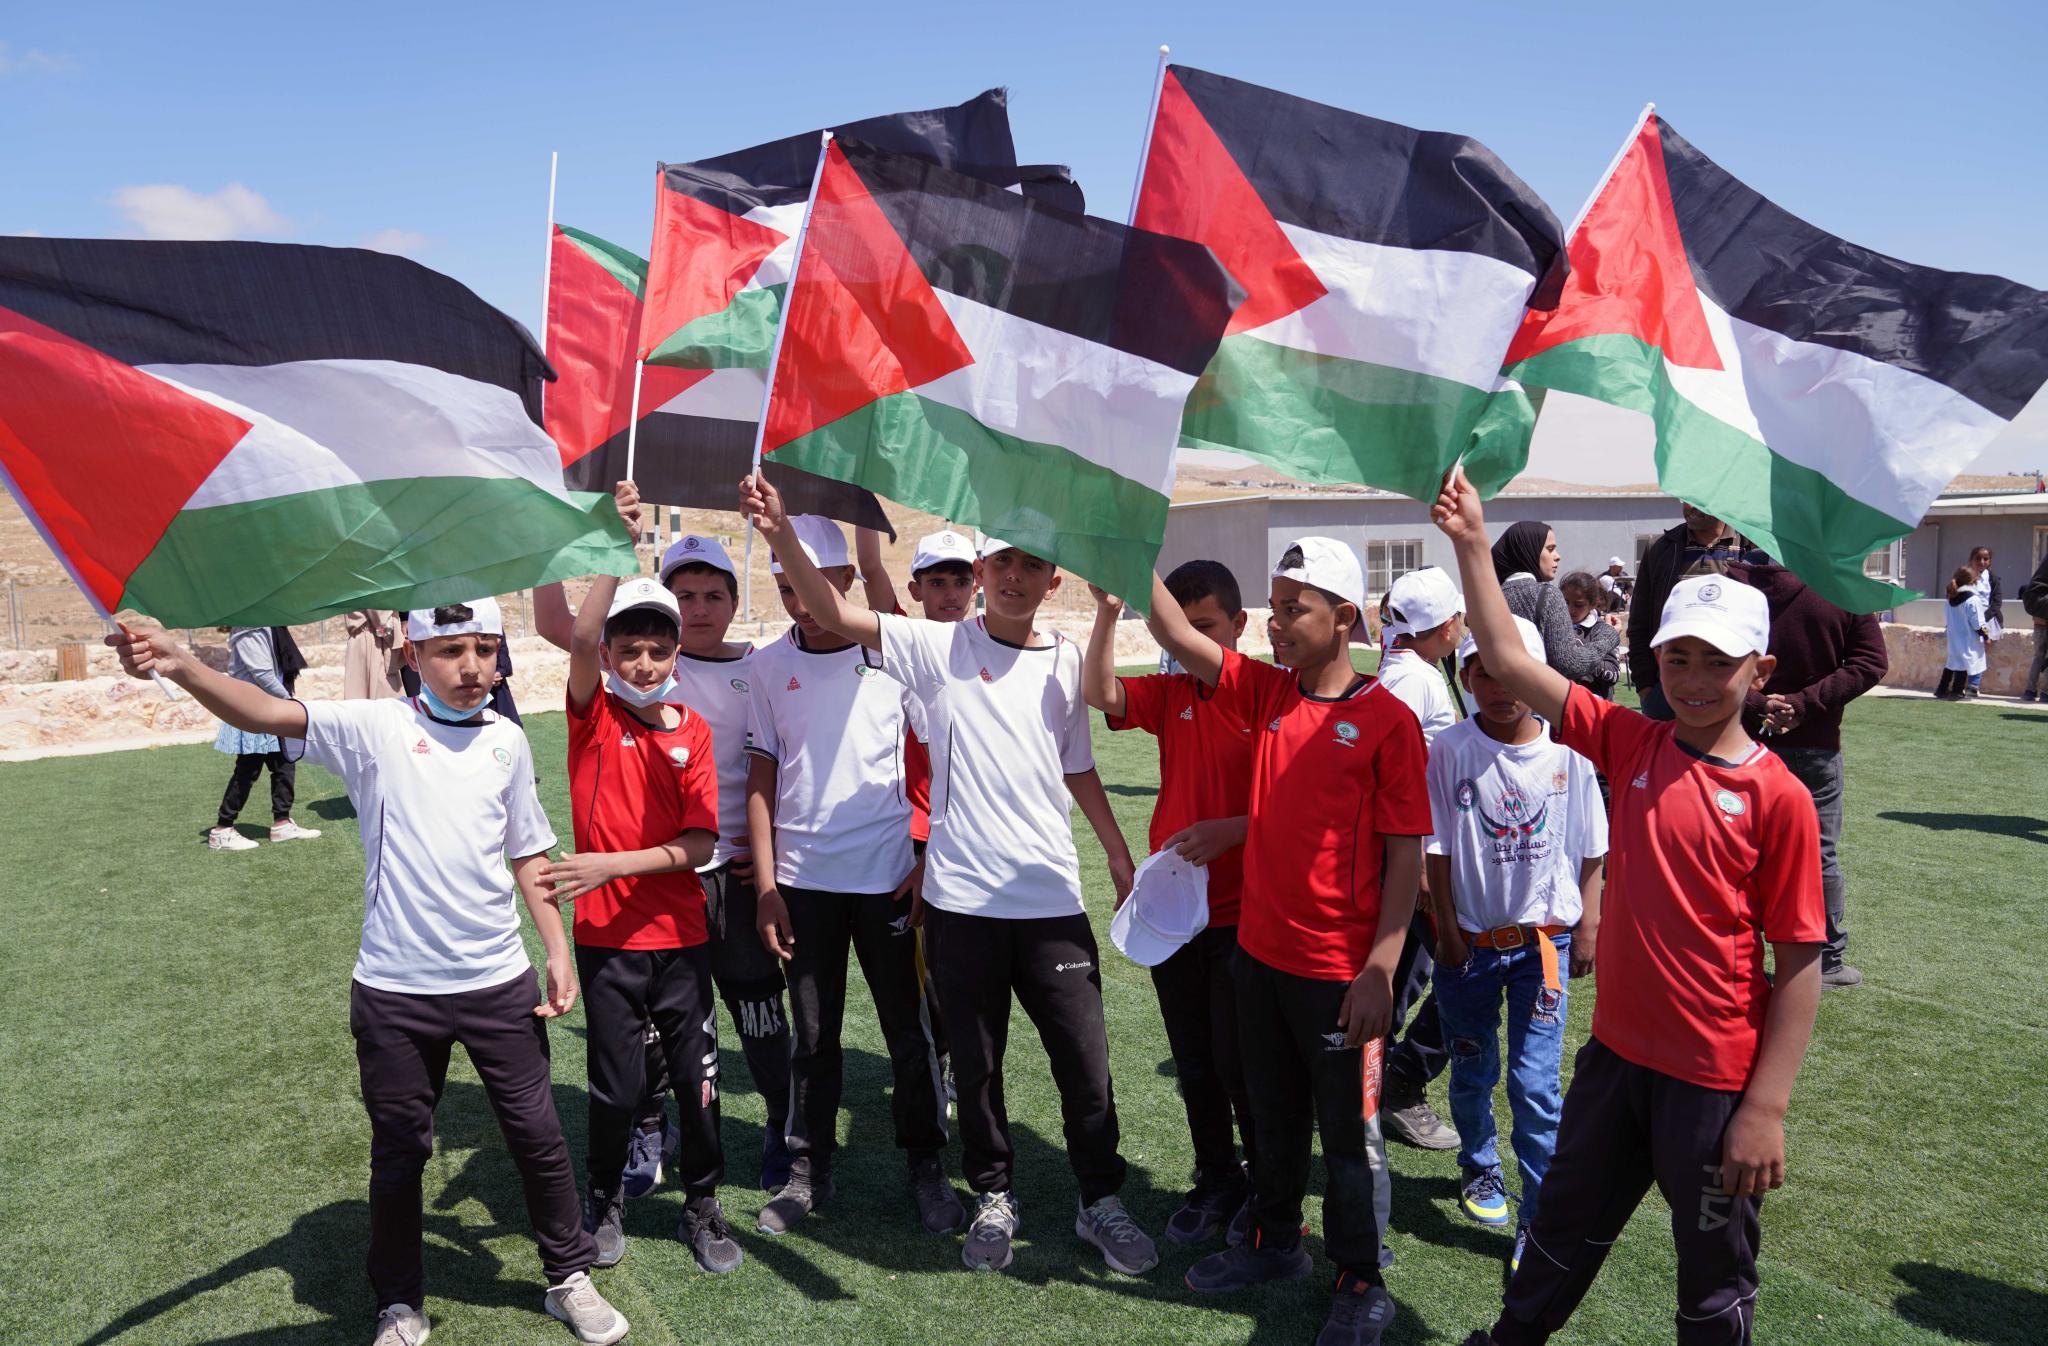 On its 20th Anniversary, AAUP and under a Joint Partnership with the Ministry of Education and the Supreme Council for Youth and Sports Organizes a Marathon "To Support Massafer Yatta Case"